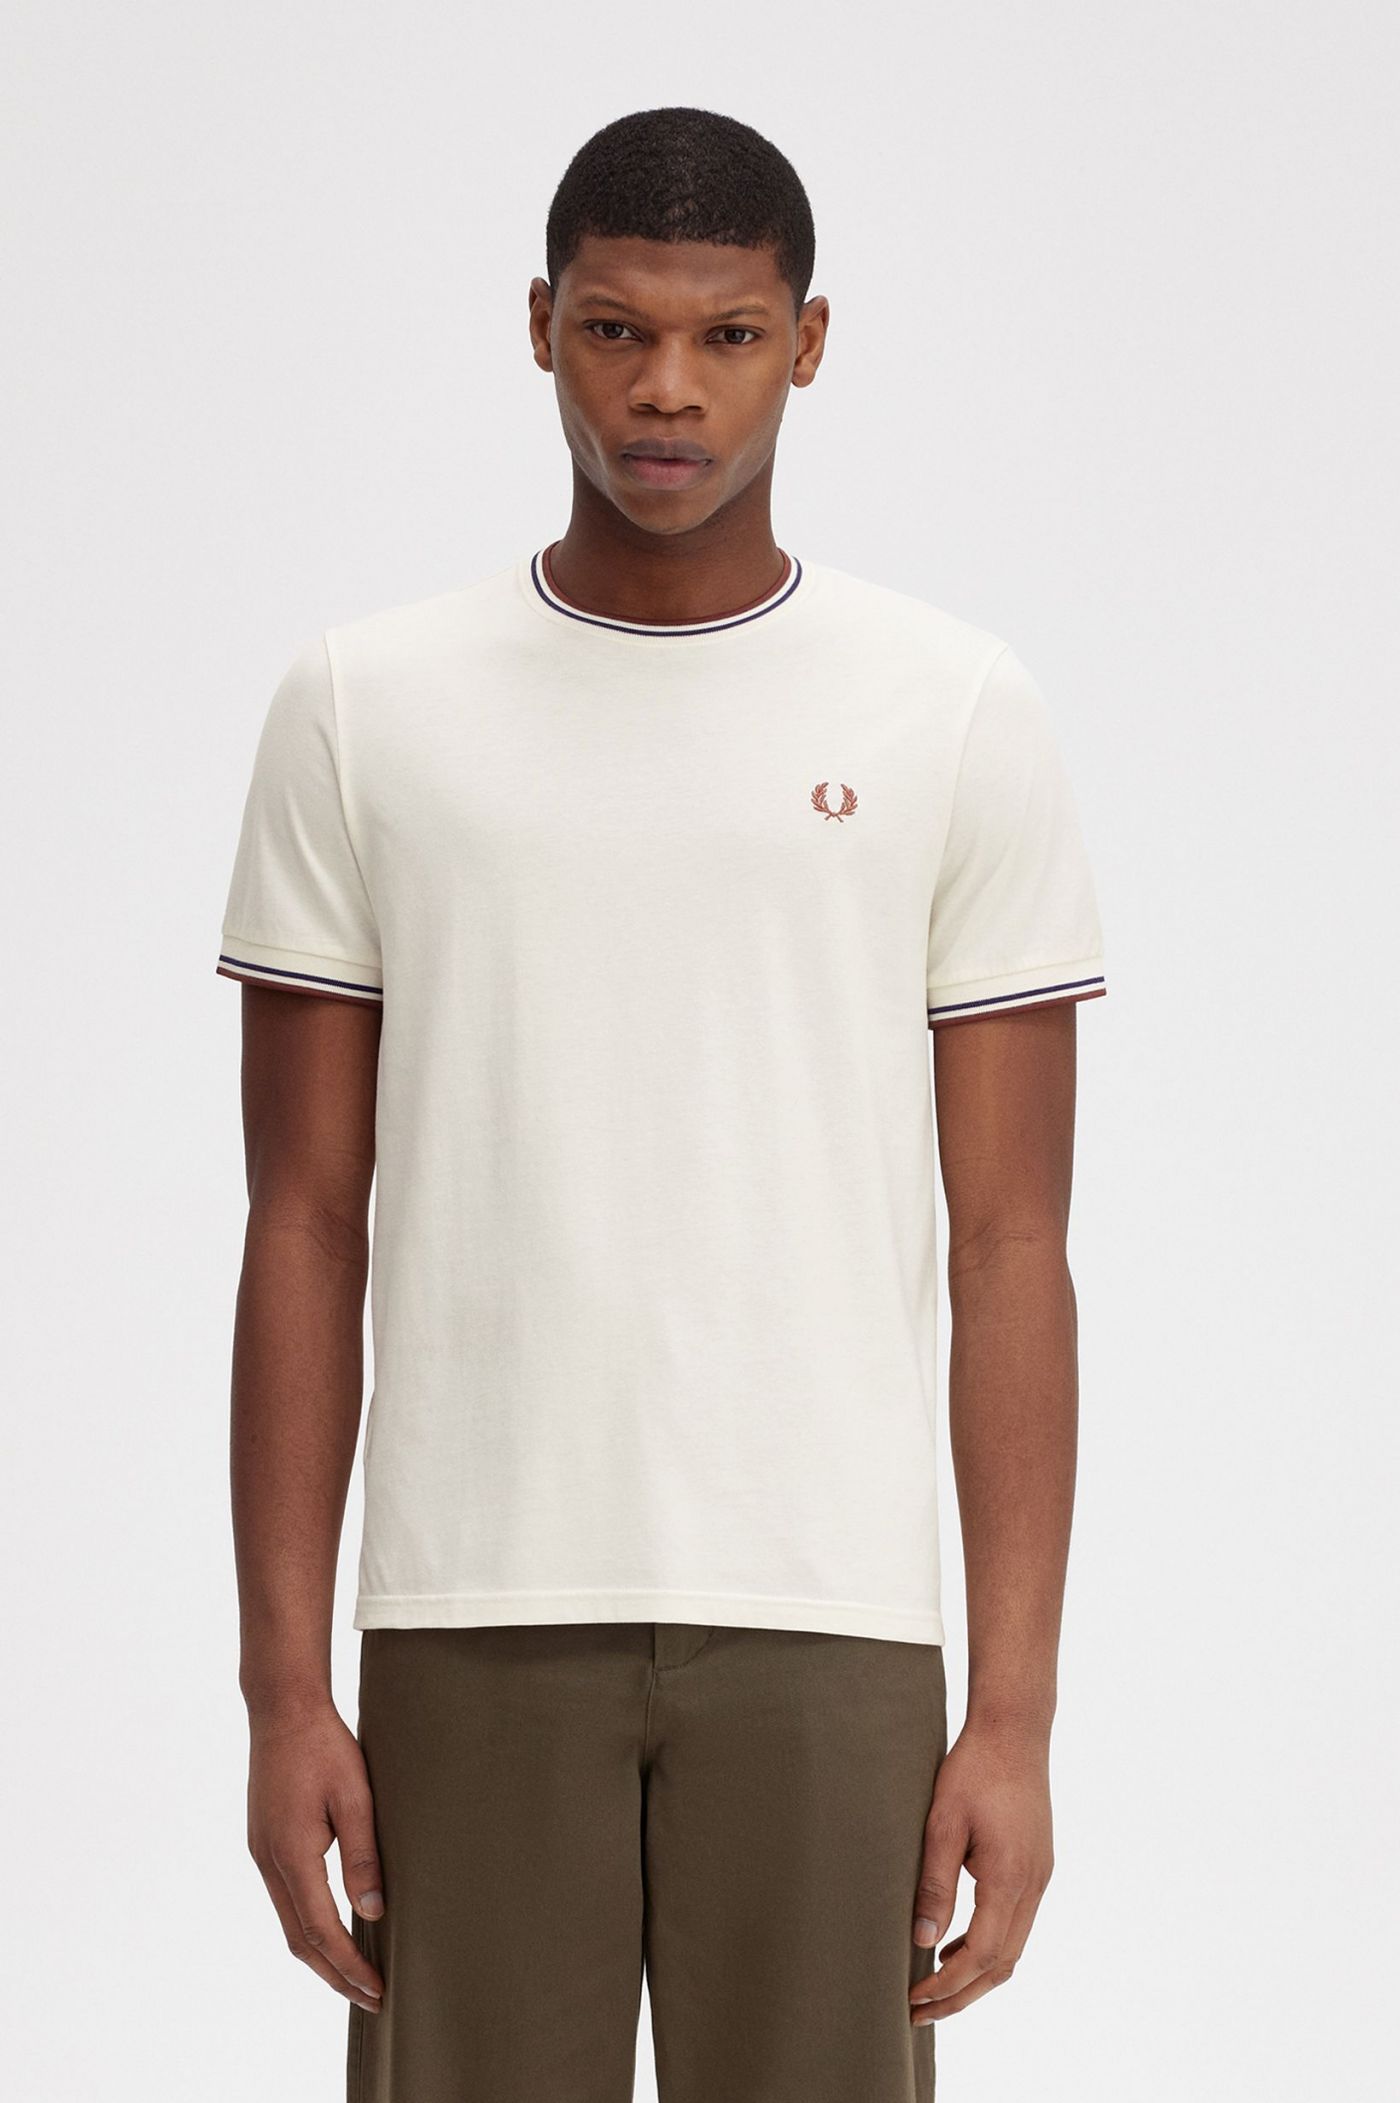 Twin Tipped T-Shirt - Ecru / Whisky Brown | Men's T-Shirts - Fred Perry